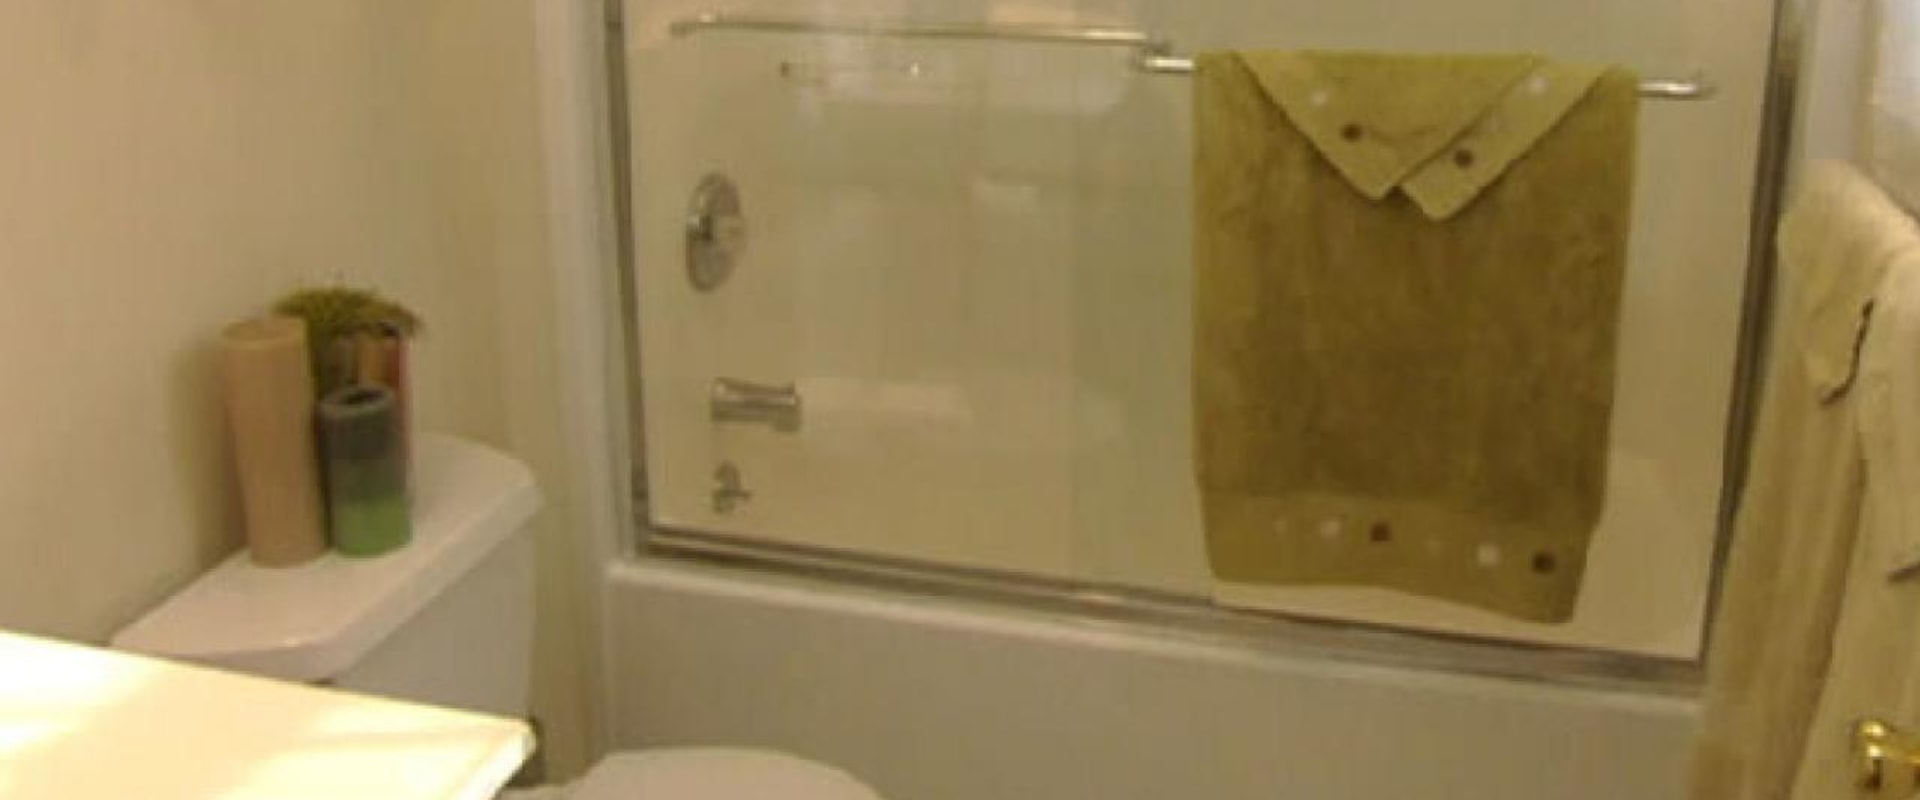 How to Install Shower Doors Quickly and Easily